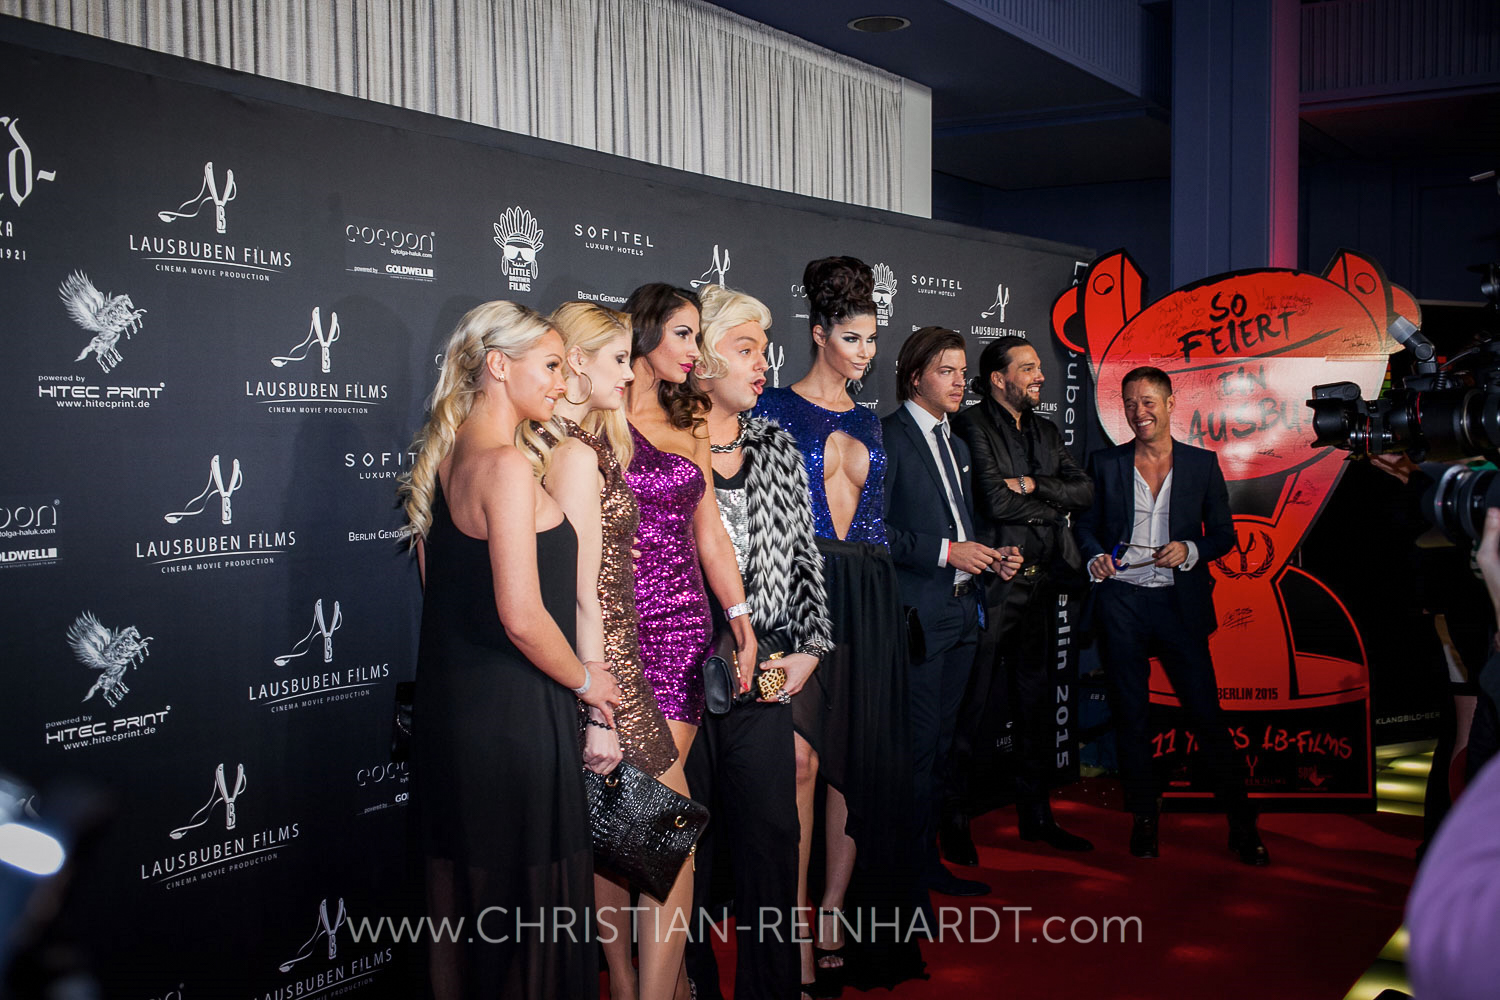 WUNDERLAND Entertainment - Berlinale-Aftershow-Party Berlin